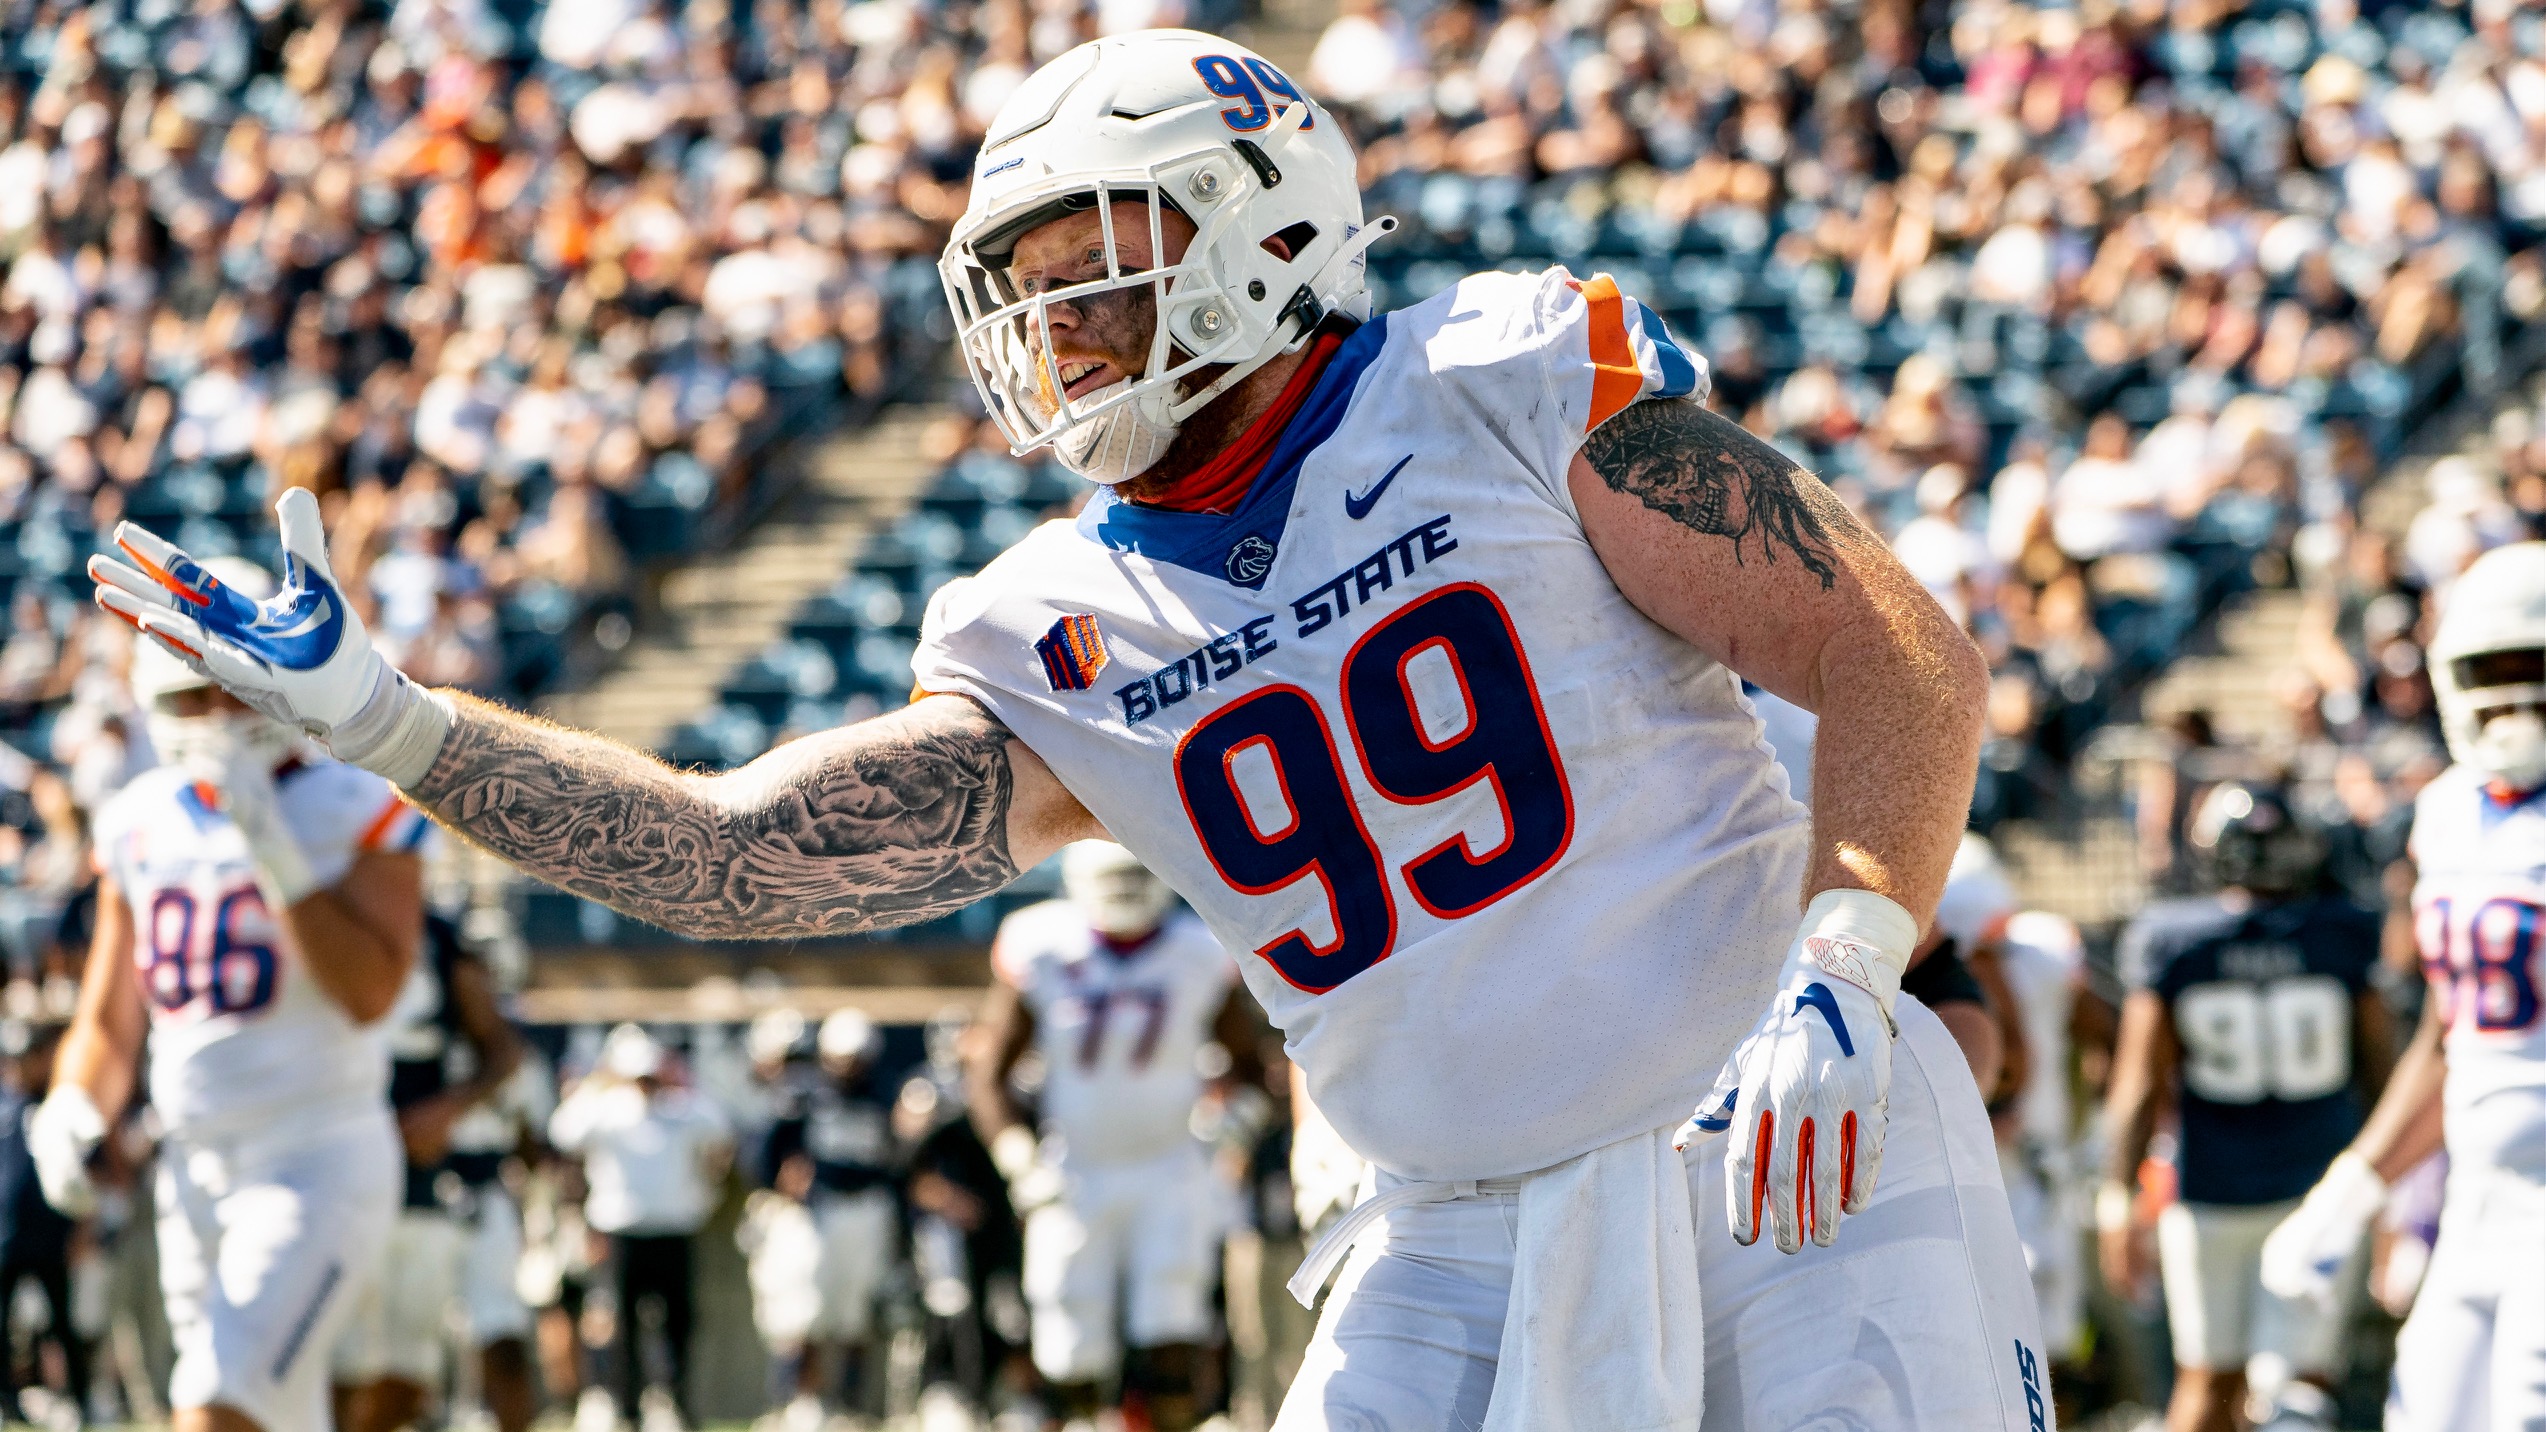 No. 4 on the BNN most important players list for Boise State football